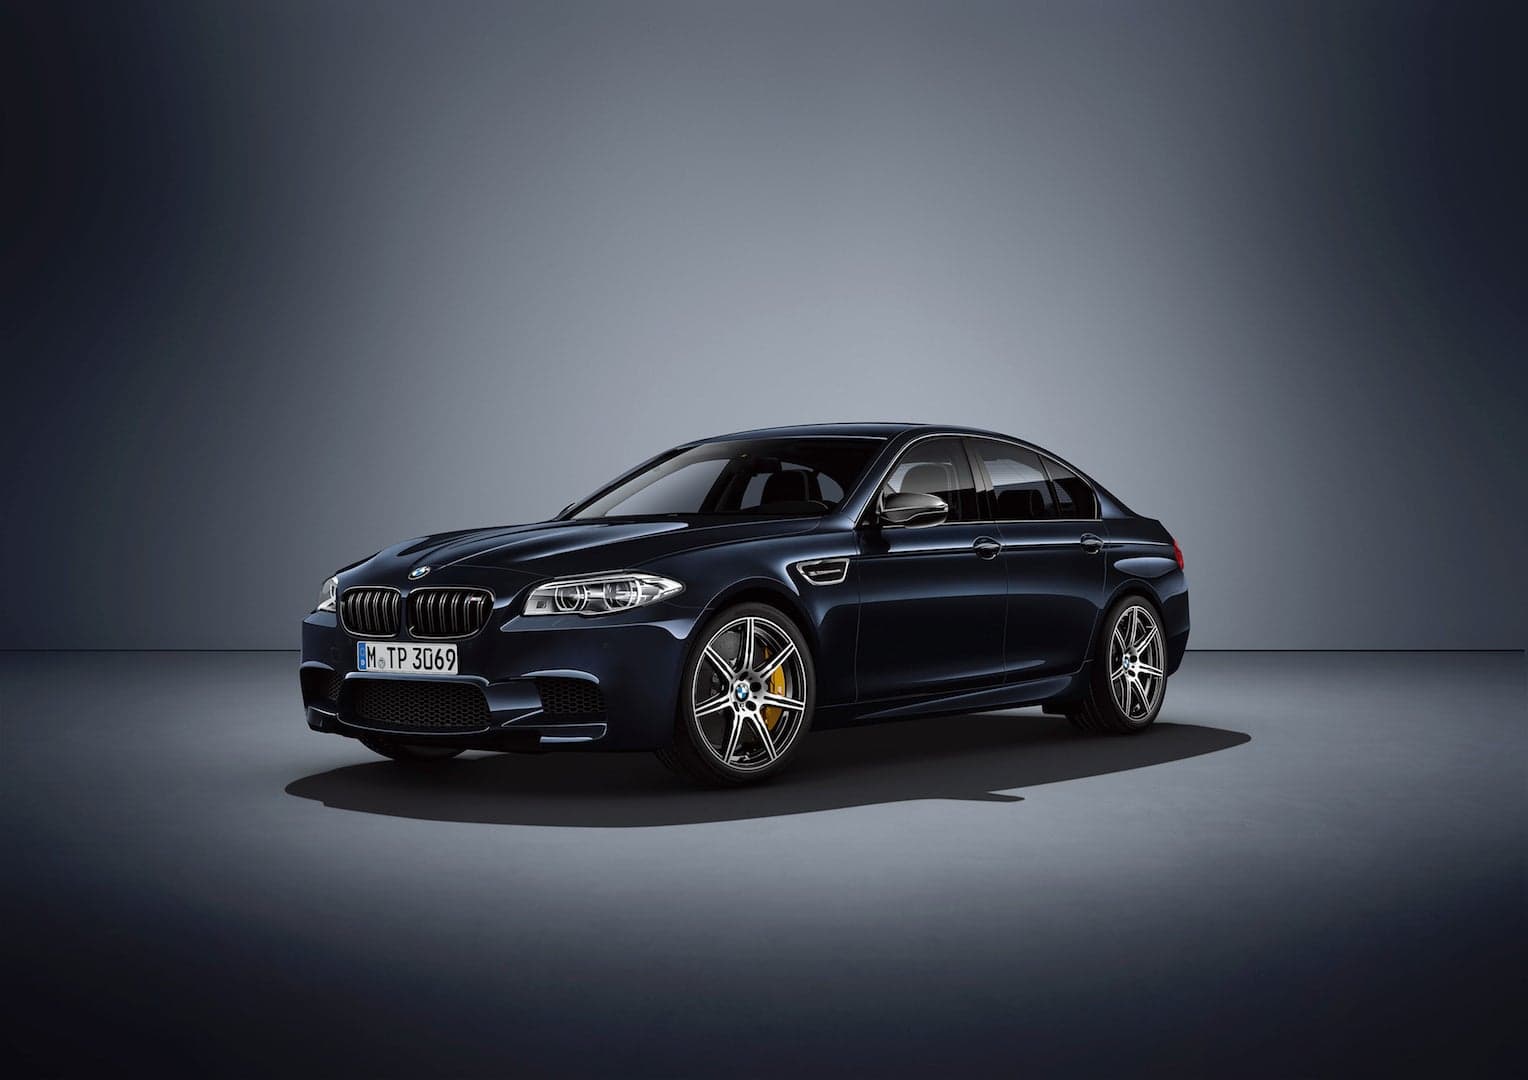 New BMW M5 Will Have 600 HP and All-Wheel Drive